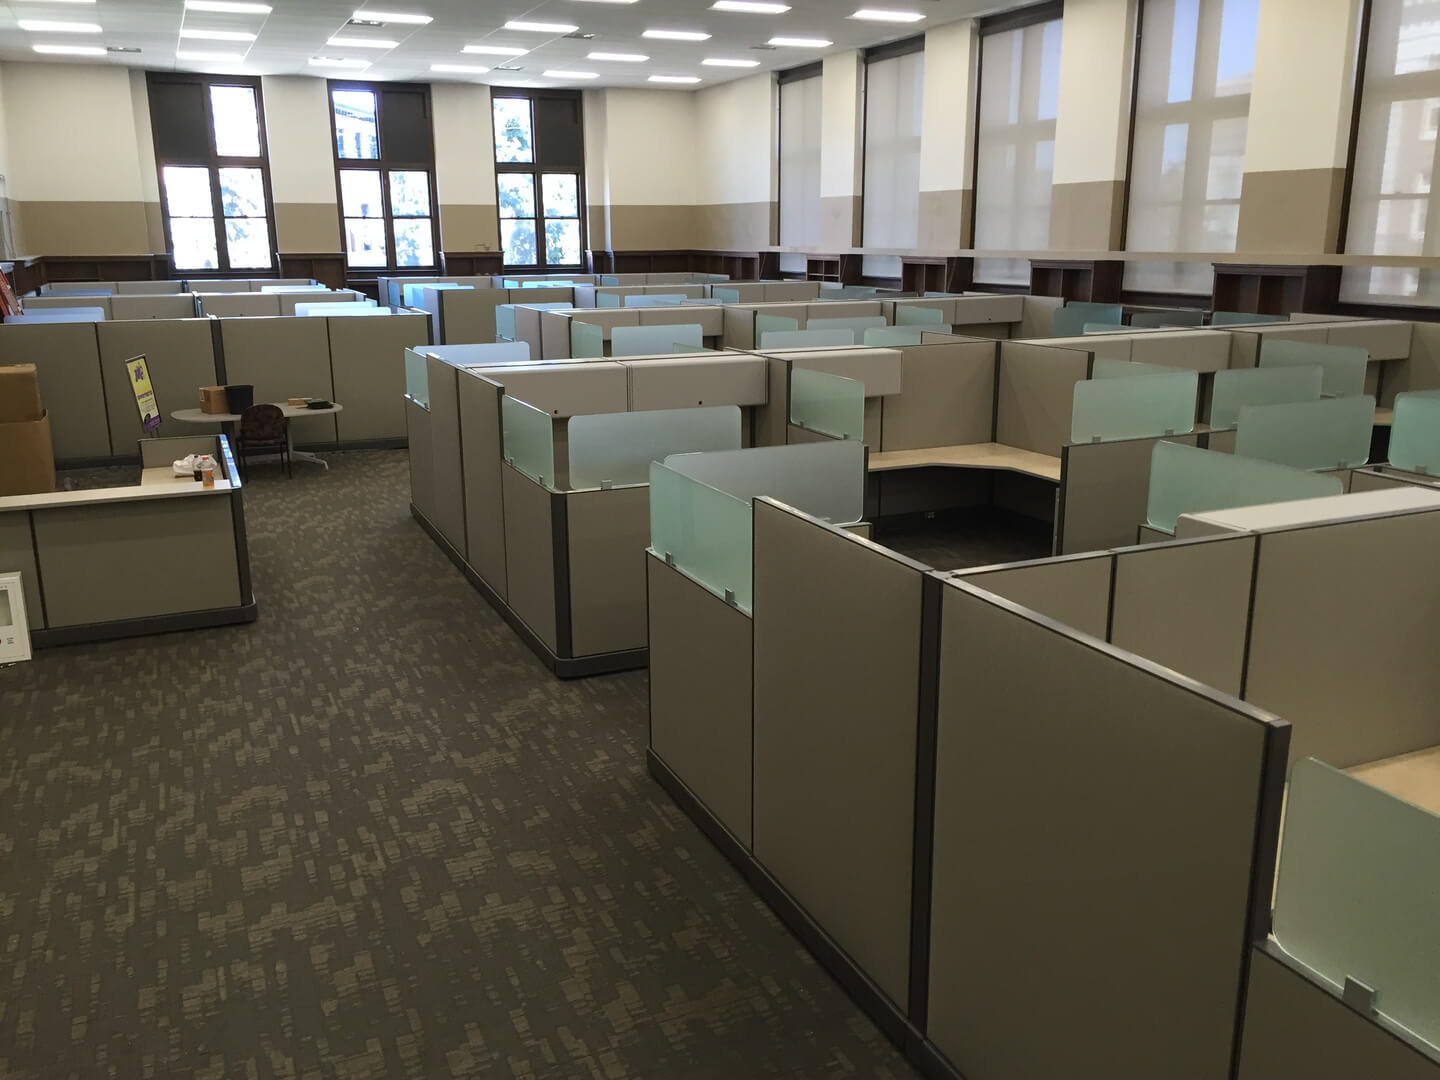 Refurbishing Office Furniture: Affordable, Like-New Office Furniture Solutions